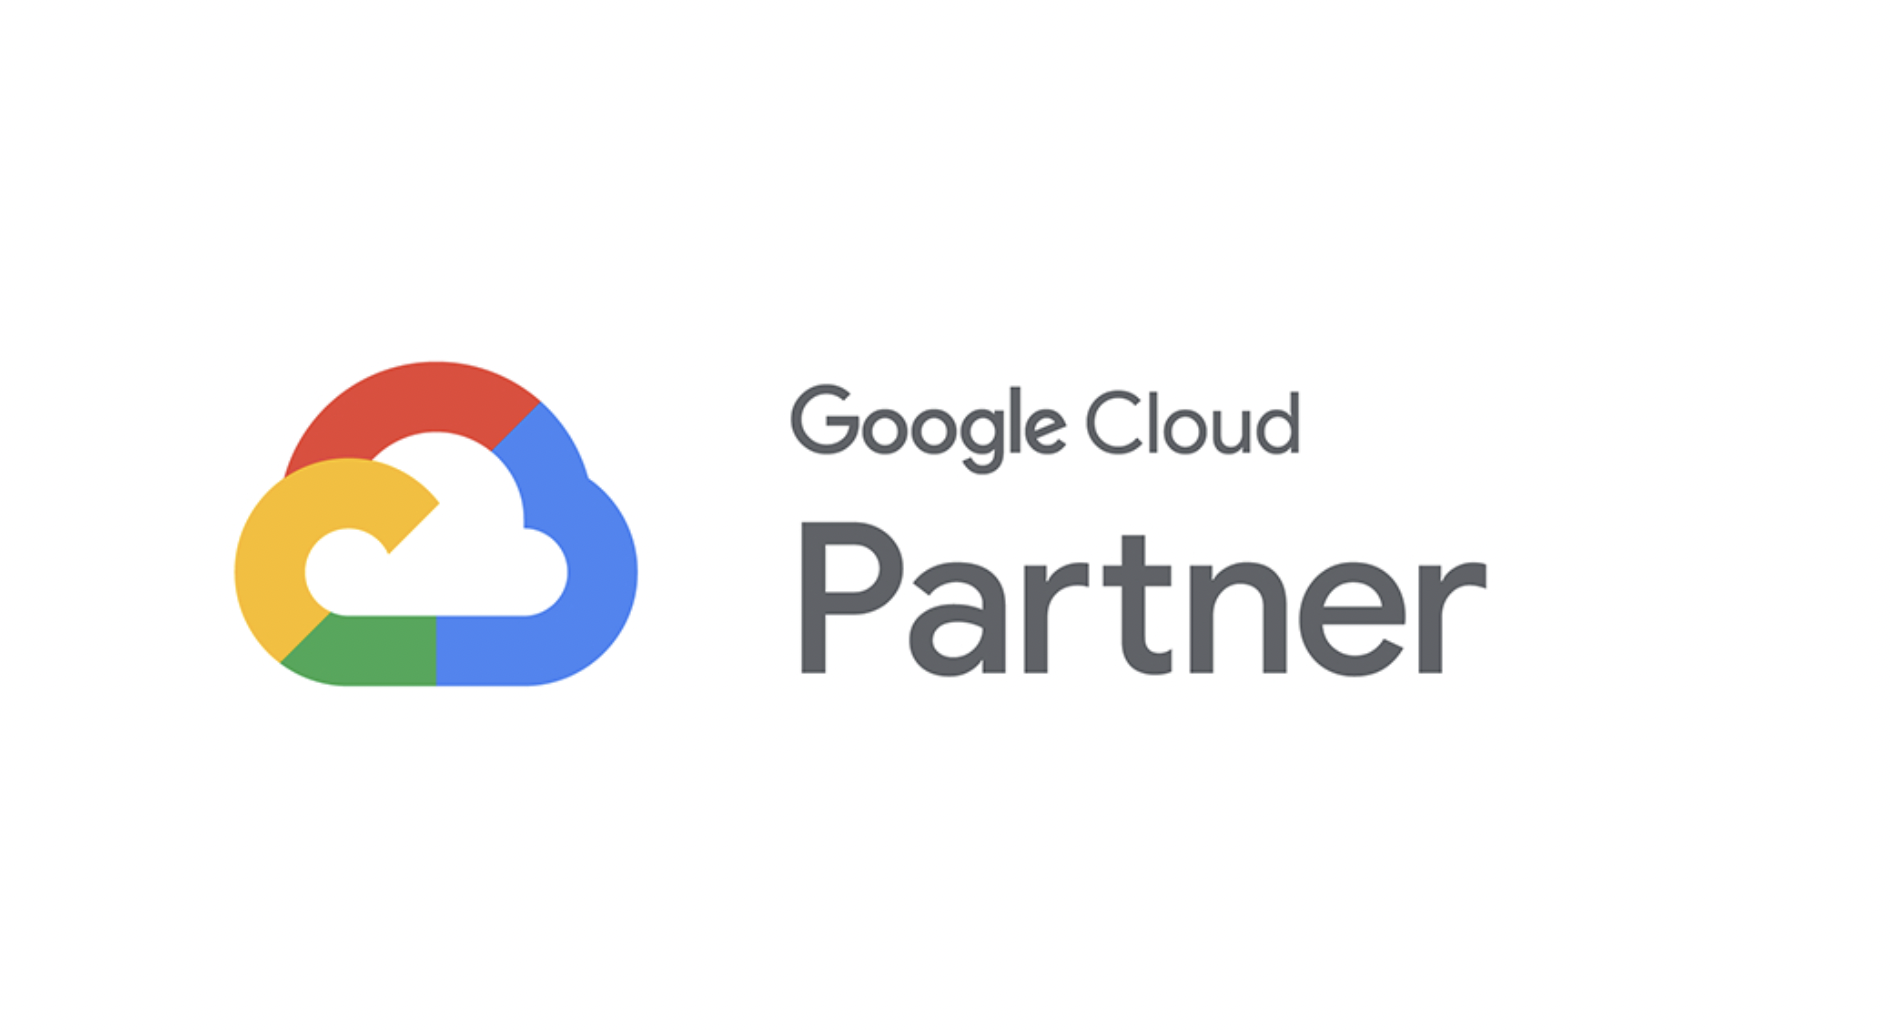 How to find the best cloud partner for your business?